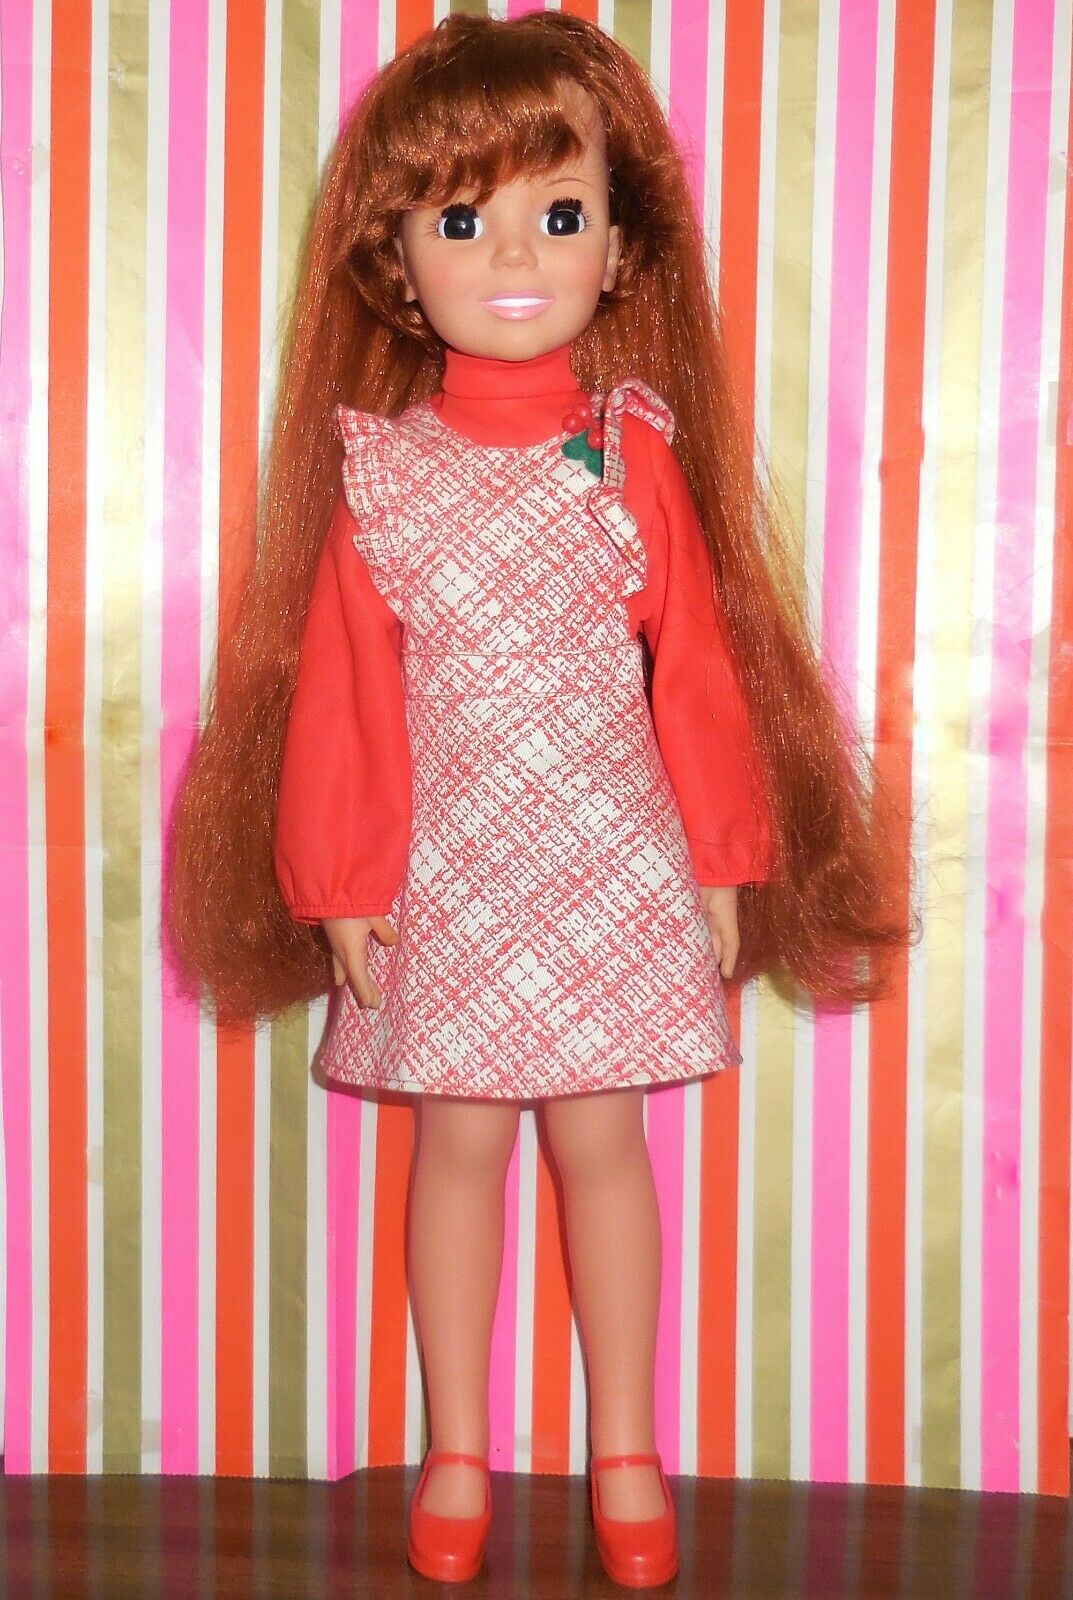 Vintage 1973 Ideal Crissy Growing Hair Swirla Curler Doll In Original Clothes